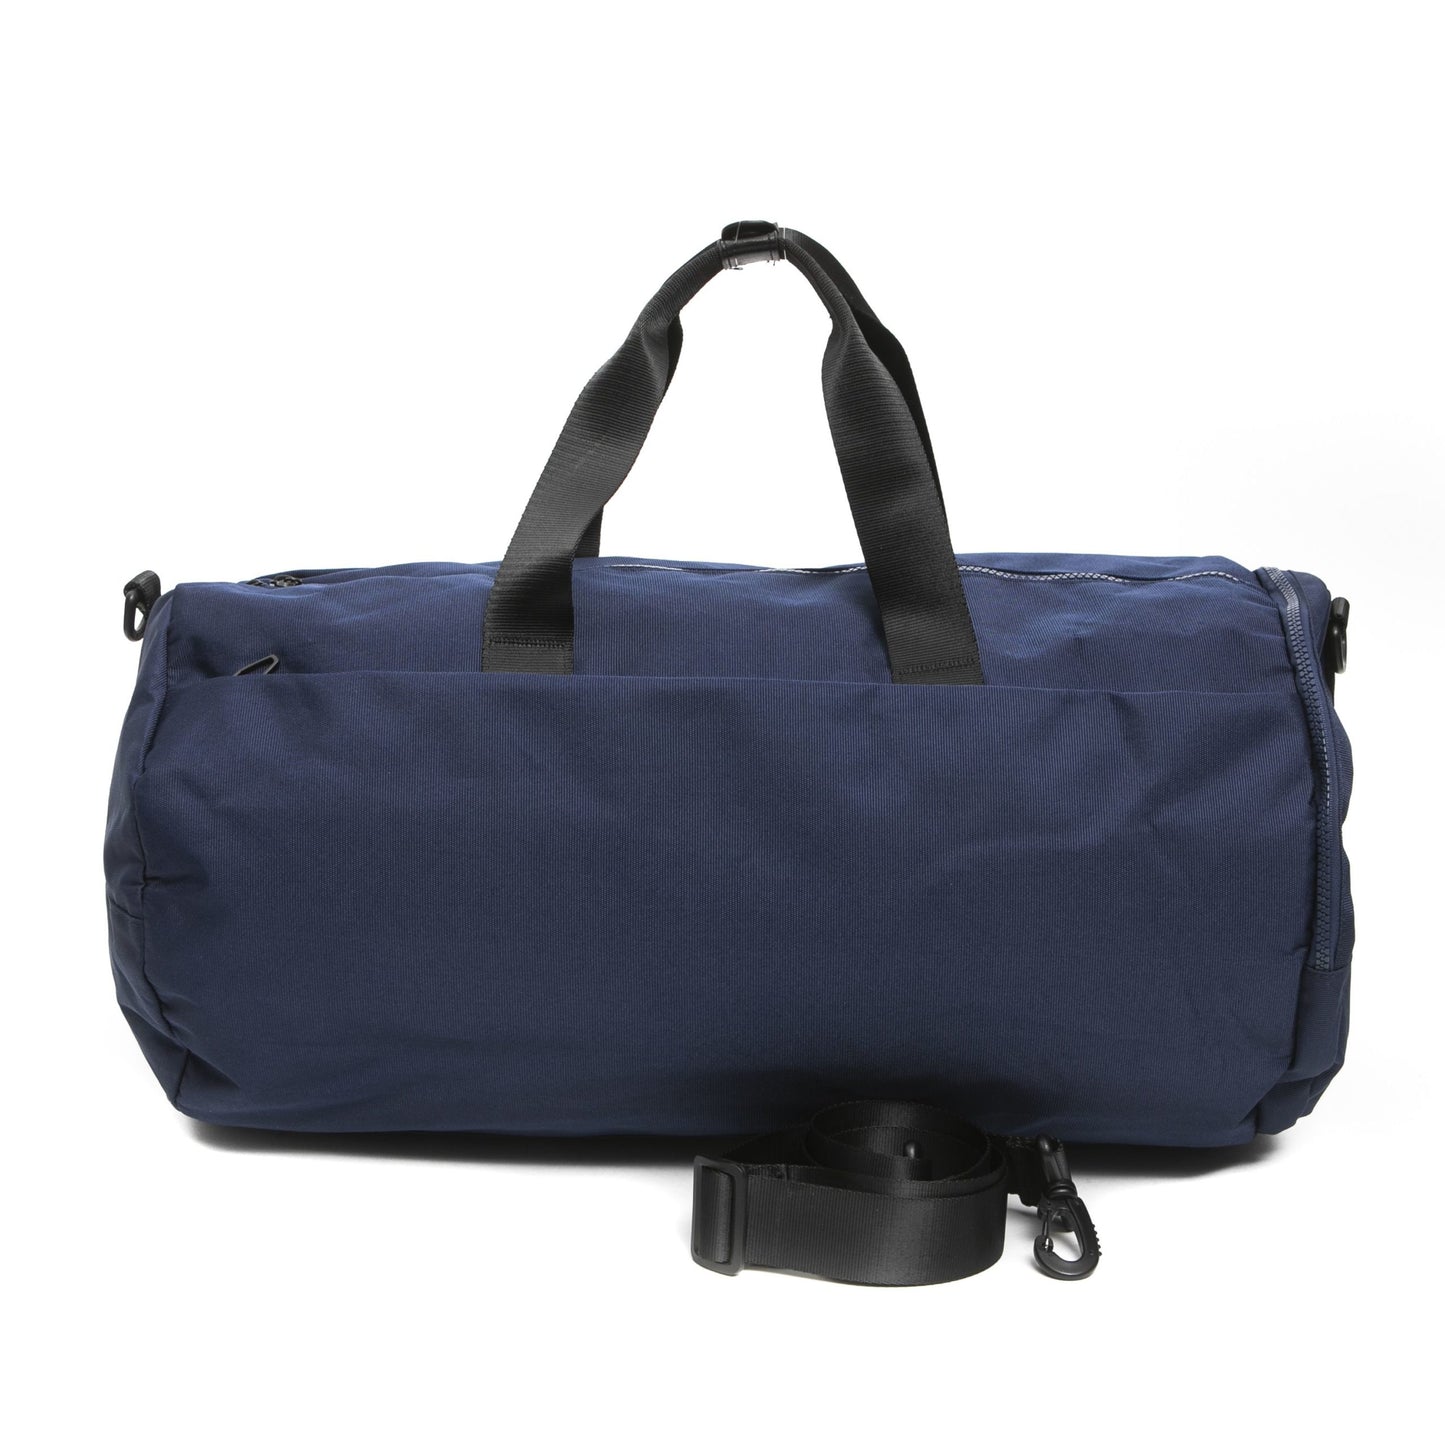 Blu Navy Luggage and Travel